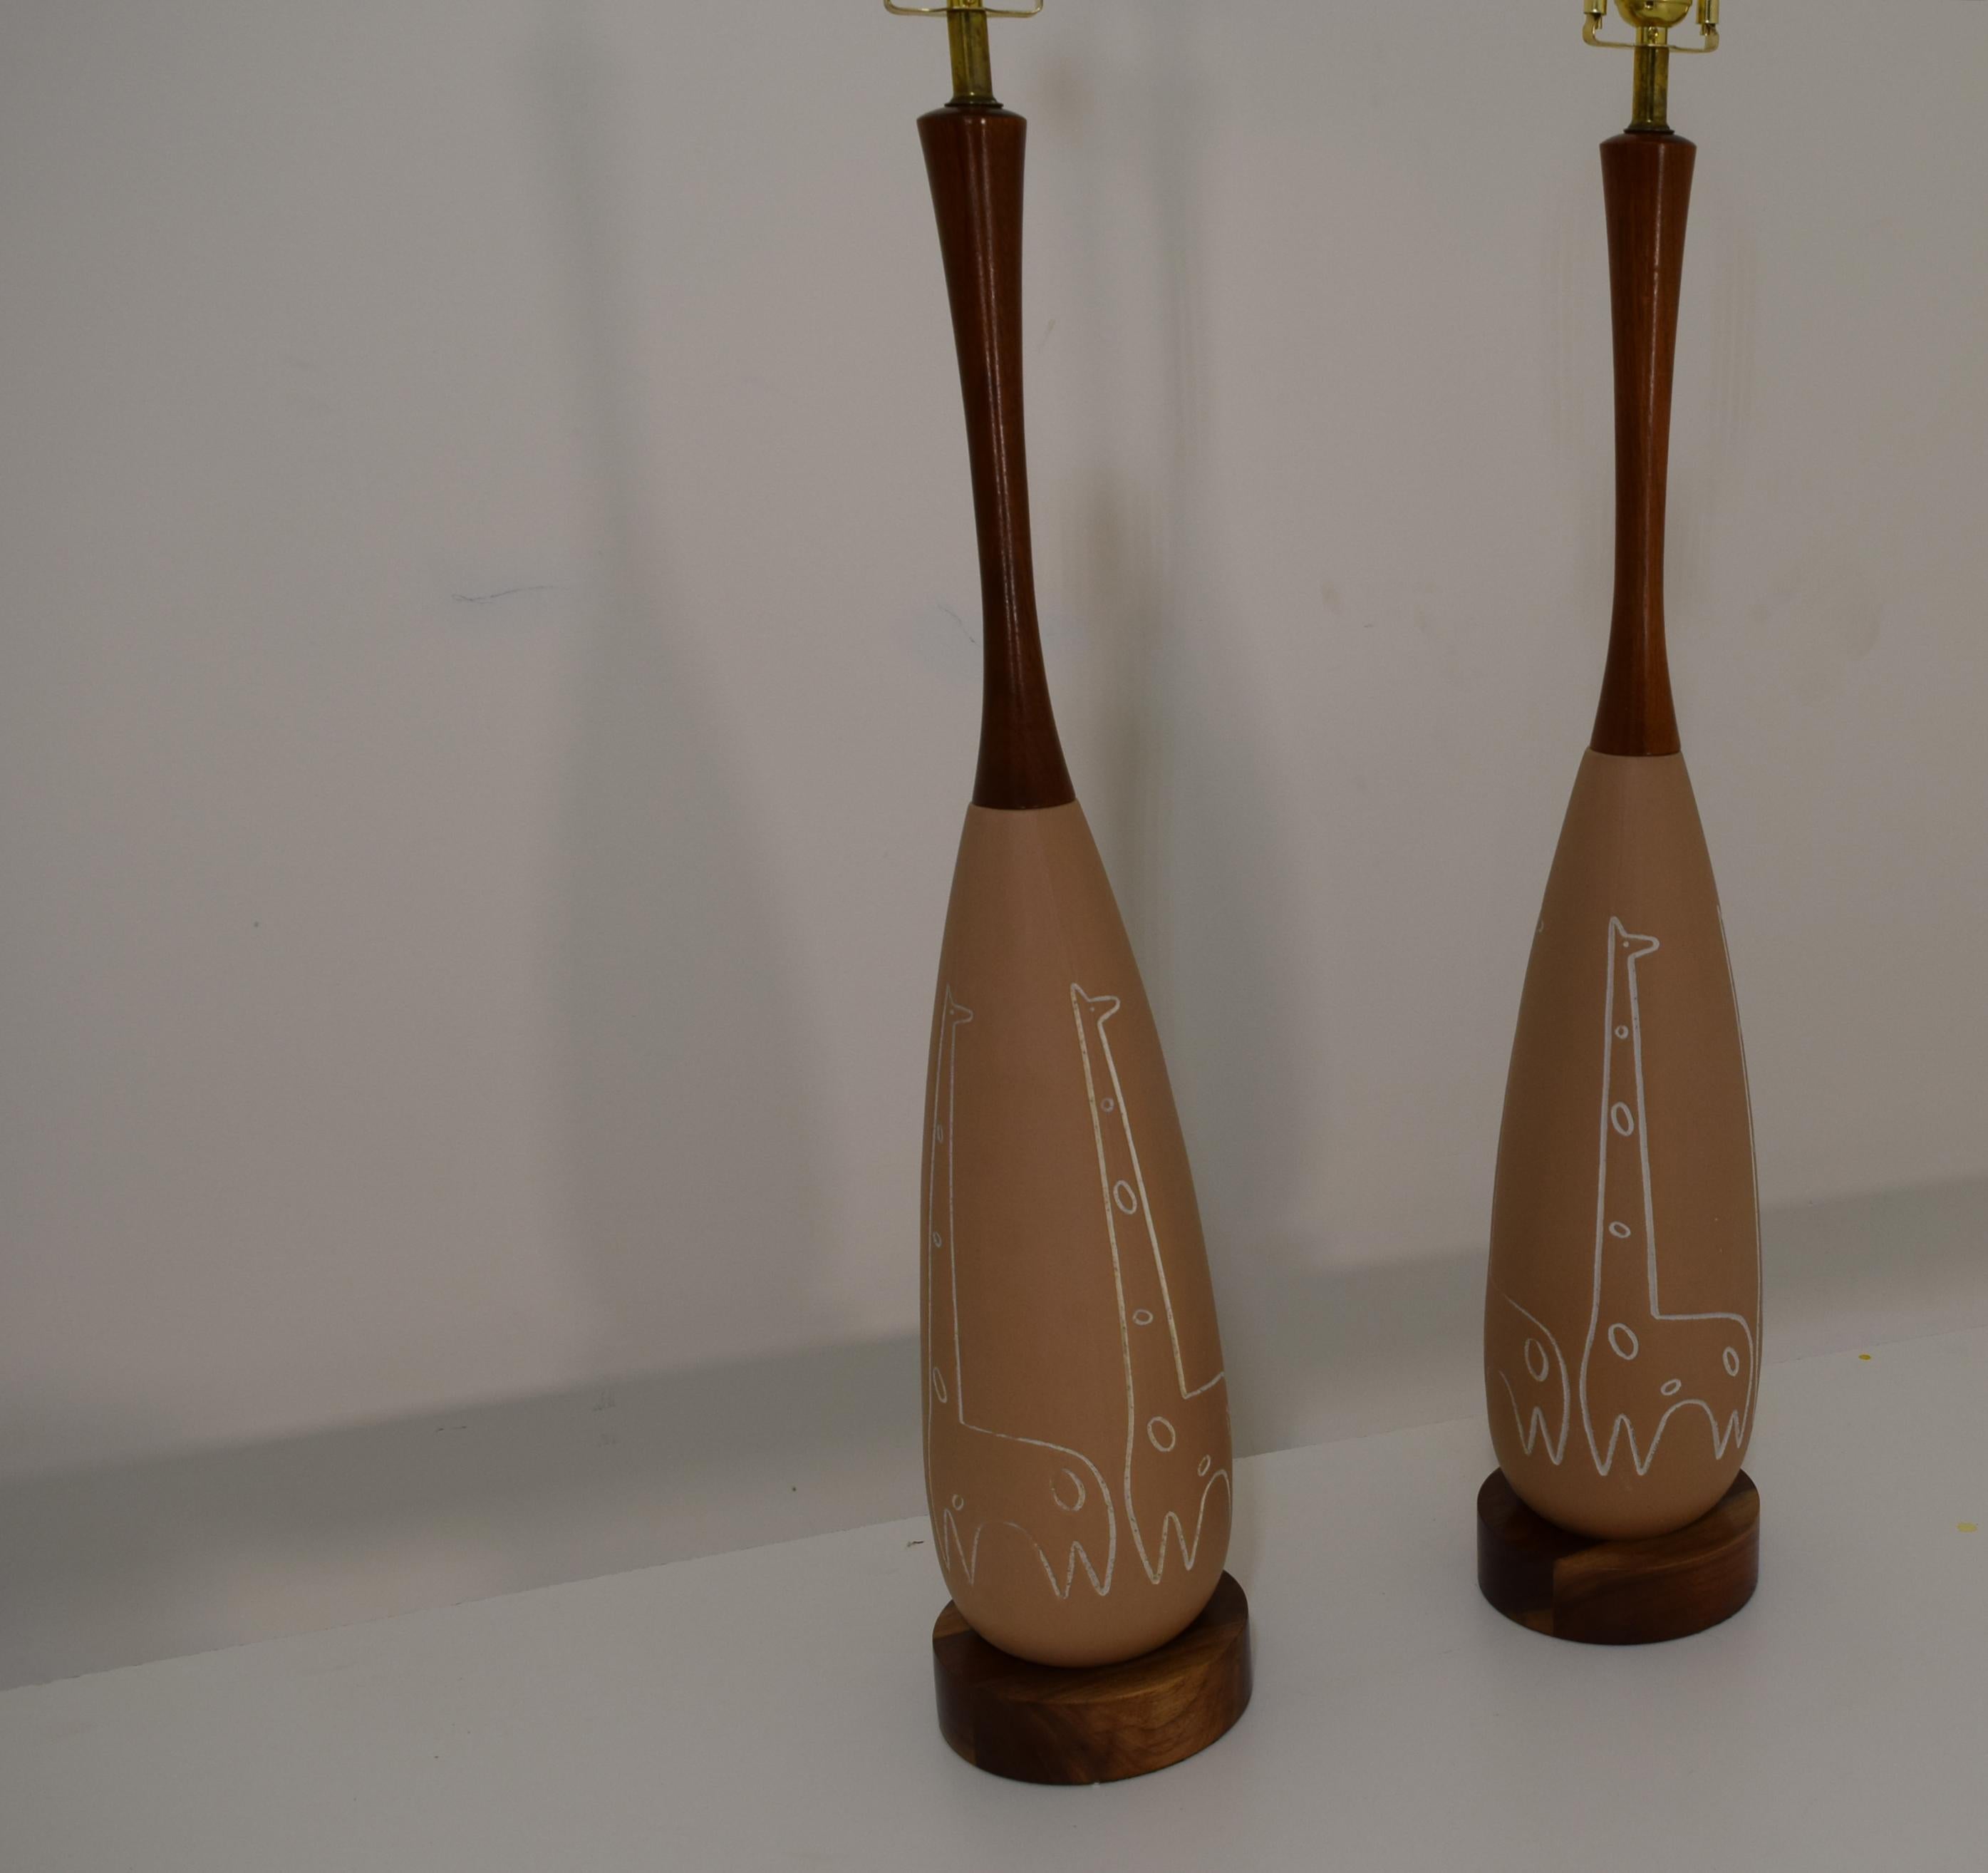 Produced circa 1950, these ceramic table lamps feature an animal motif - giraffes - incised into the ceramic. In excellent condition with the walnut freshly lacquered and the wiring updated as well as 3 way sockets and wiring for each lamp newly